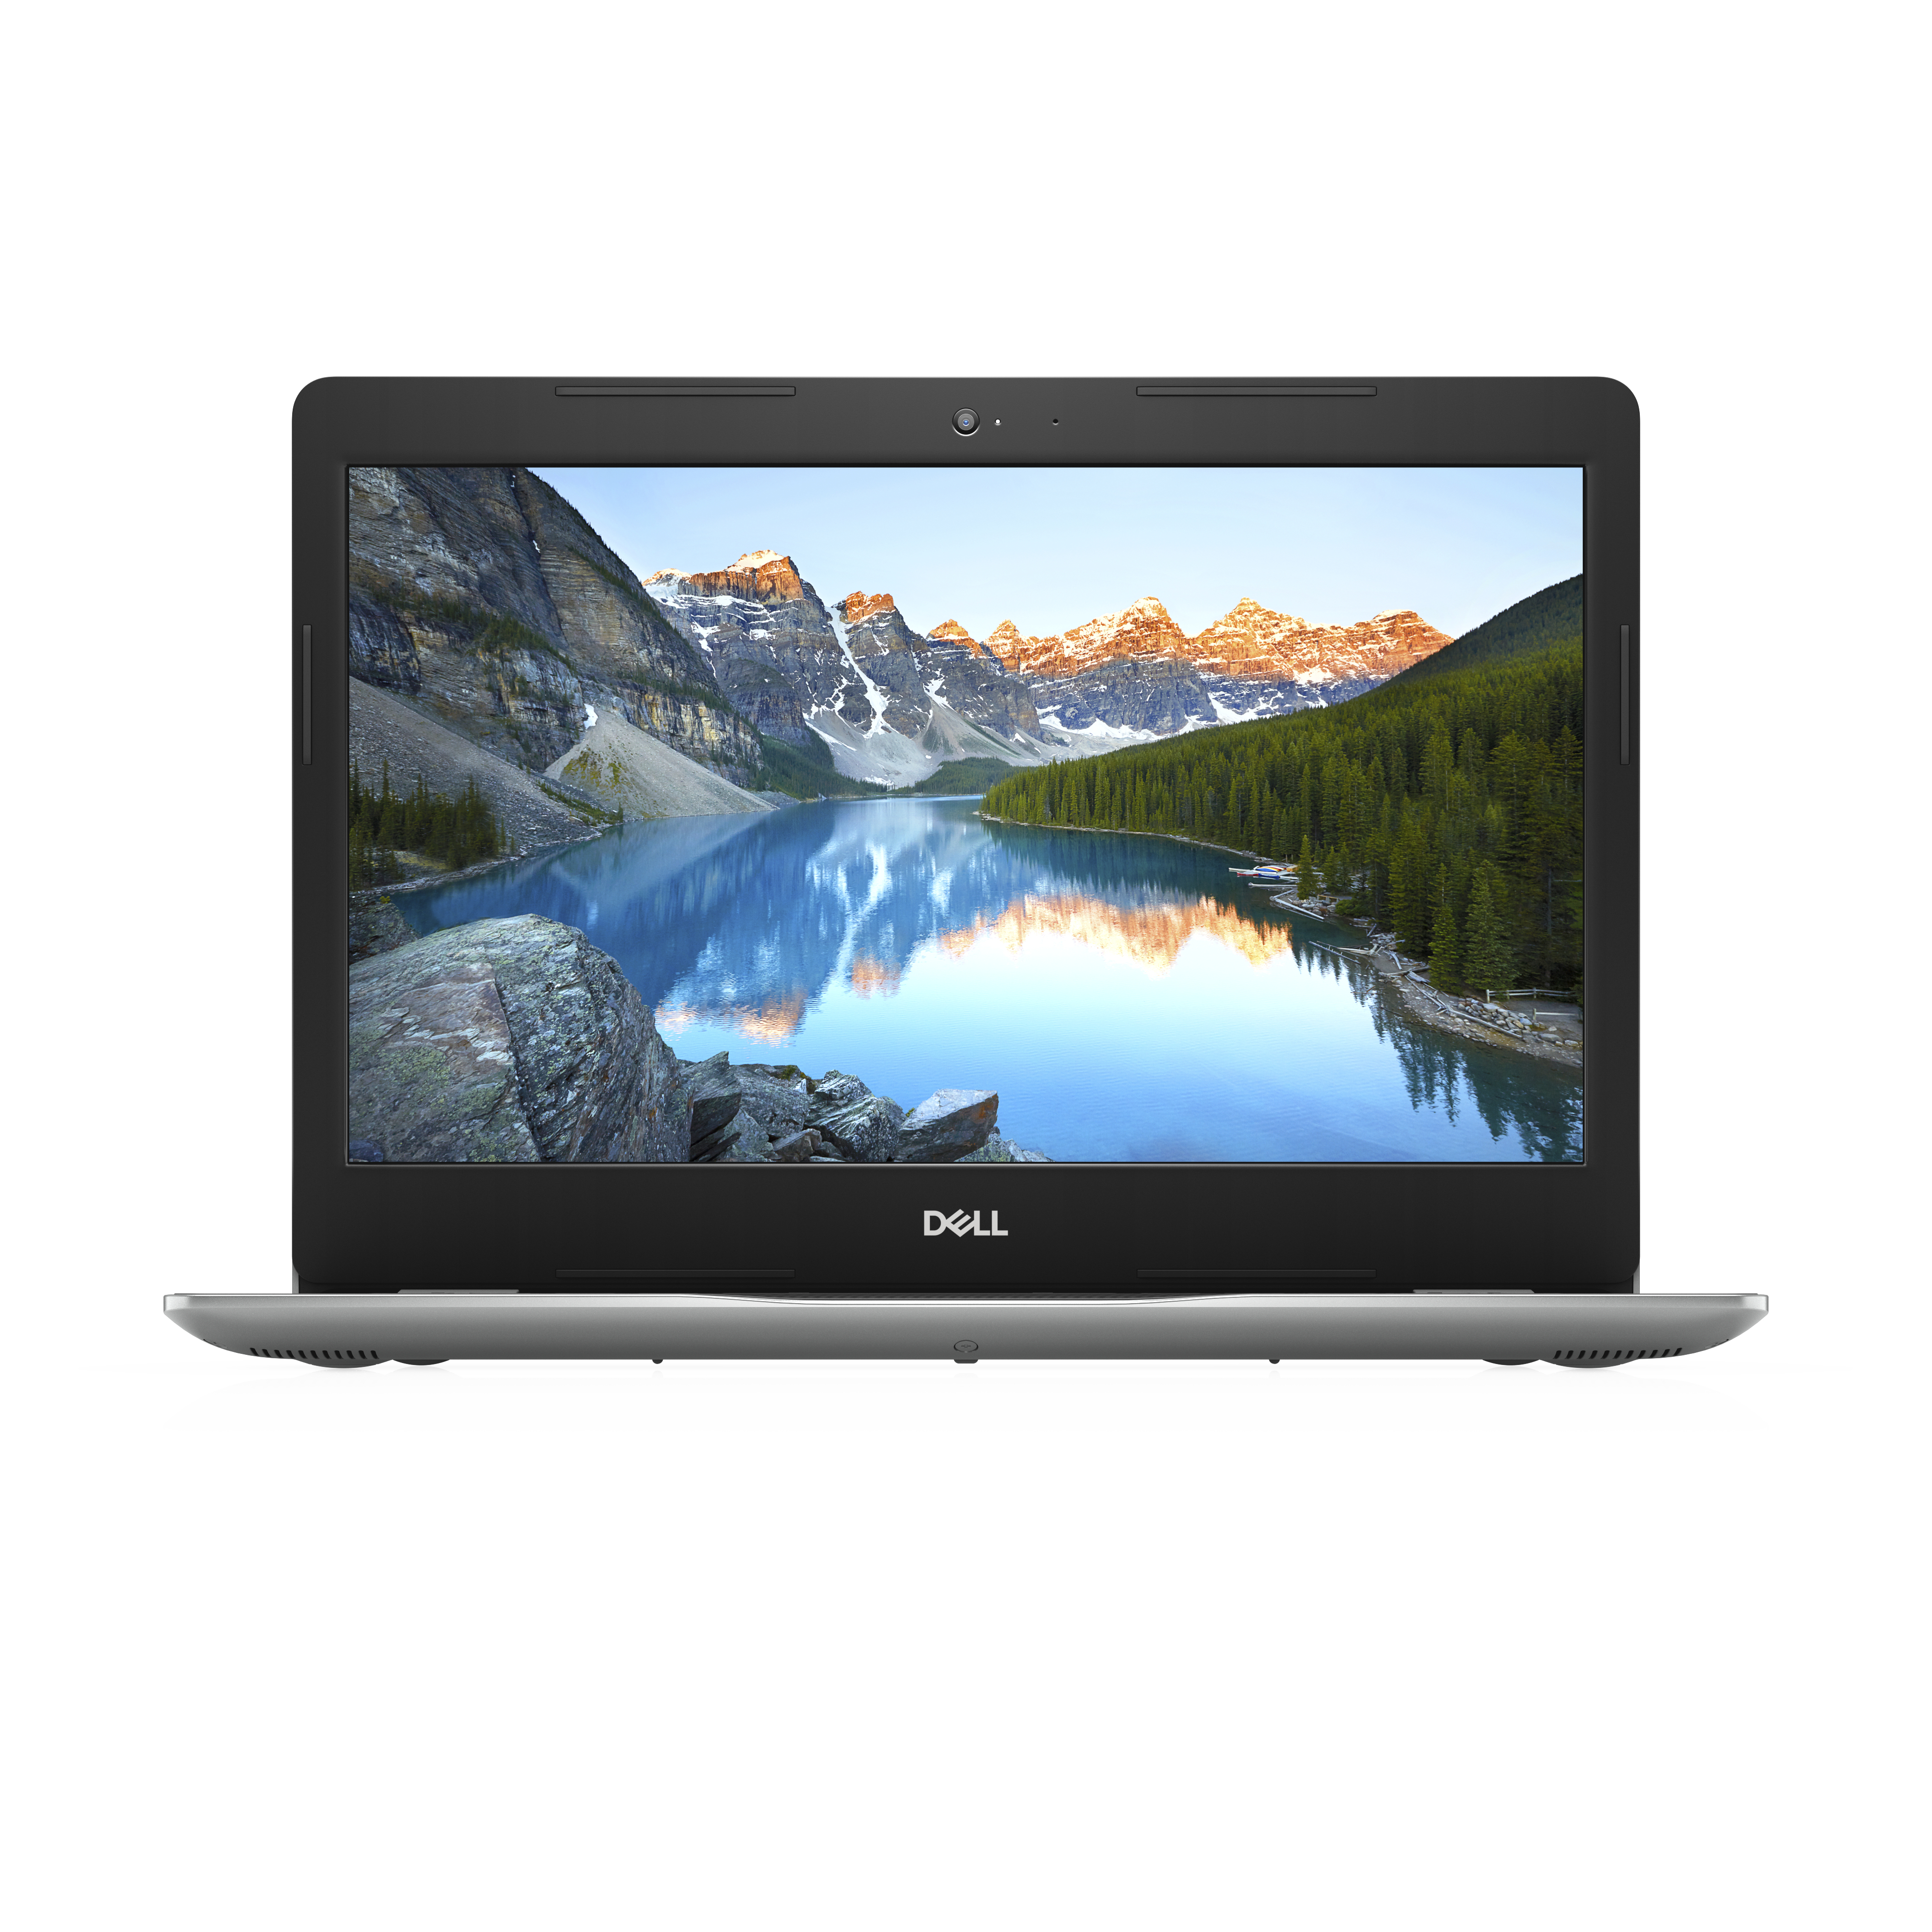 Laptop Dell Inspiron 3493 Core I5-1035G1 8 Gb 256 Ssd W10 1Wty (D1Mcw)